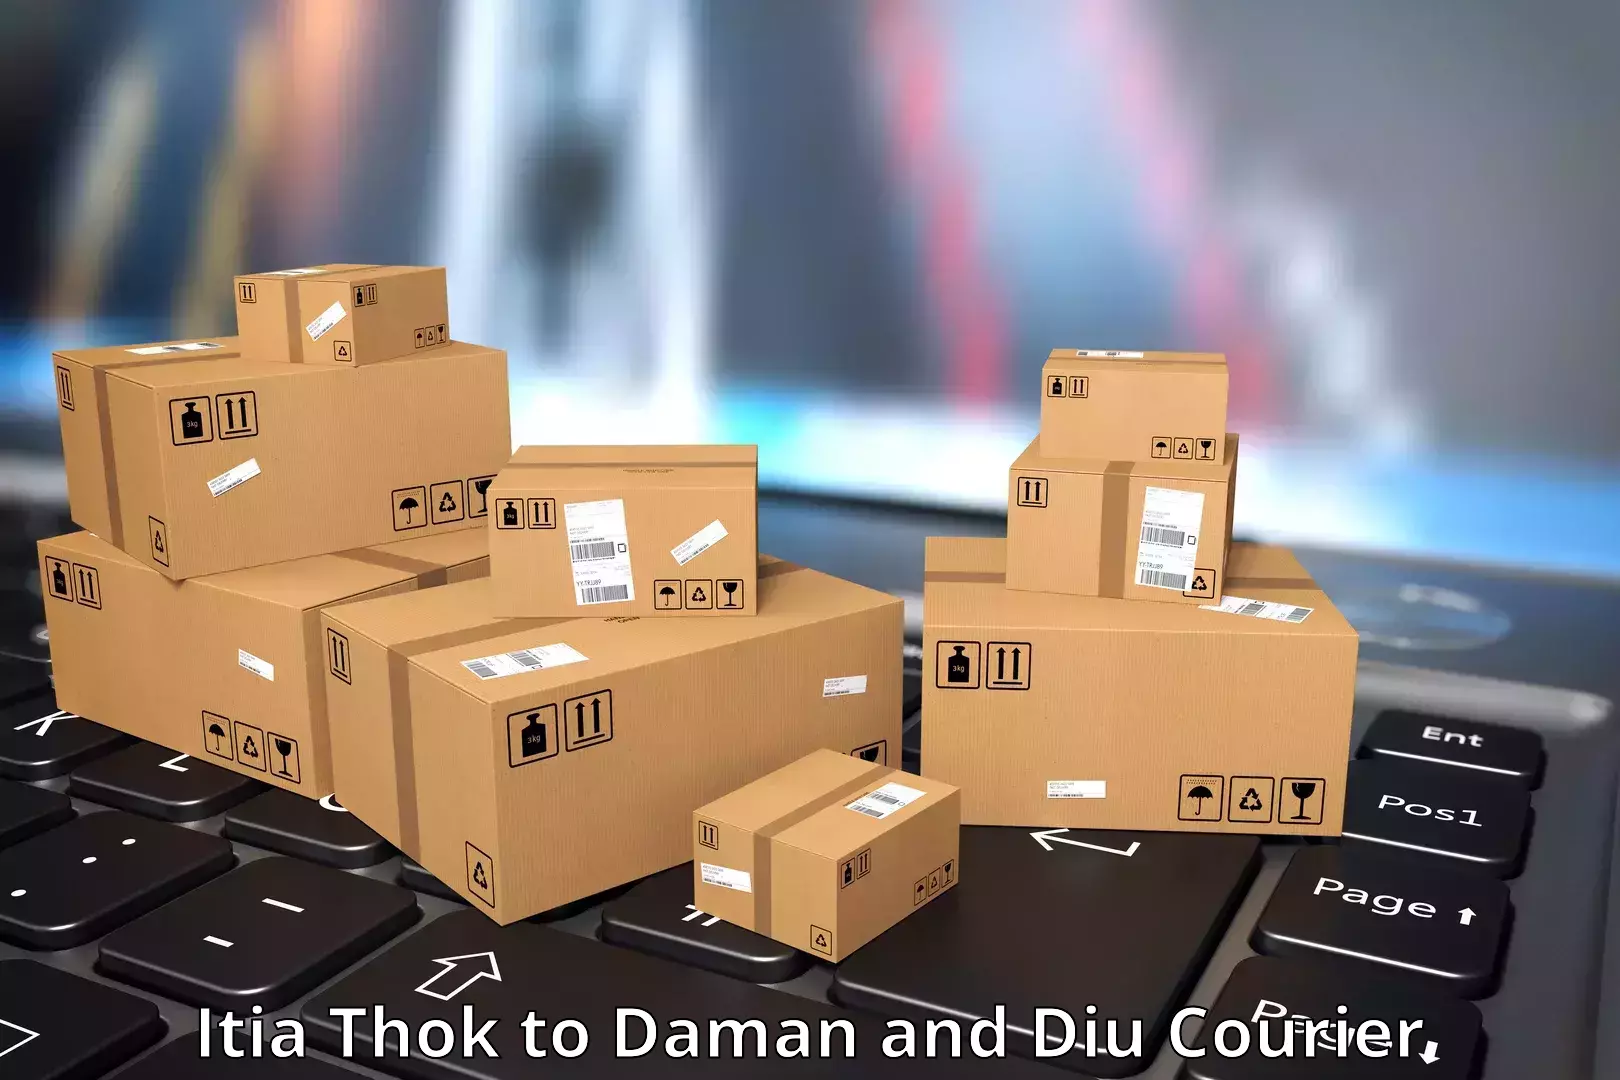 Large package courier Itia Thok to Diu